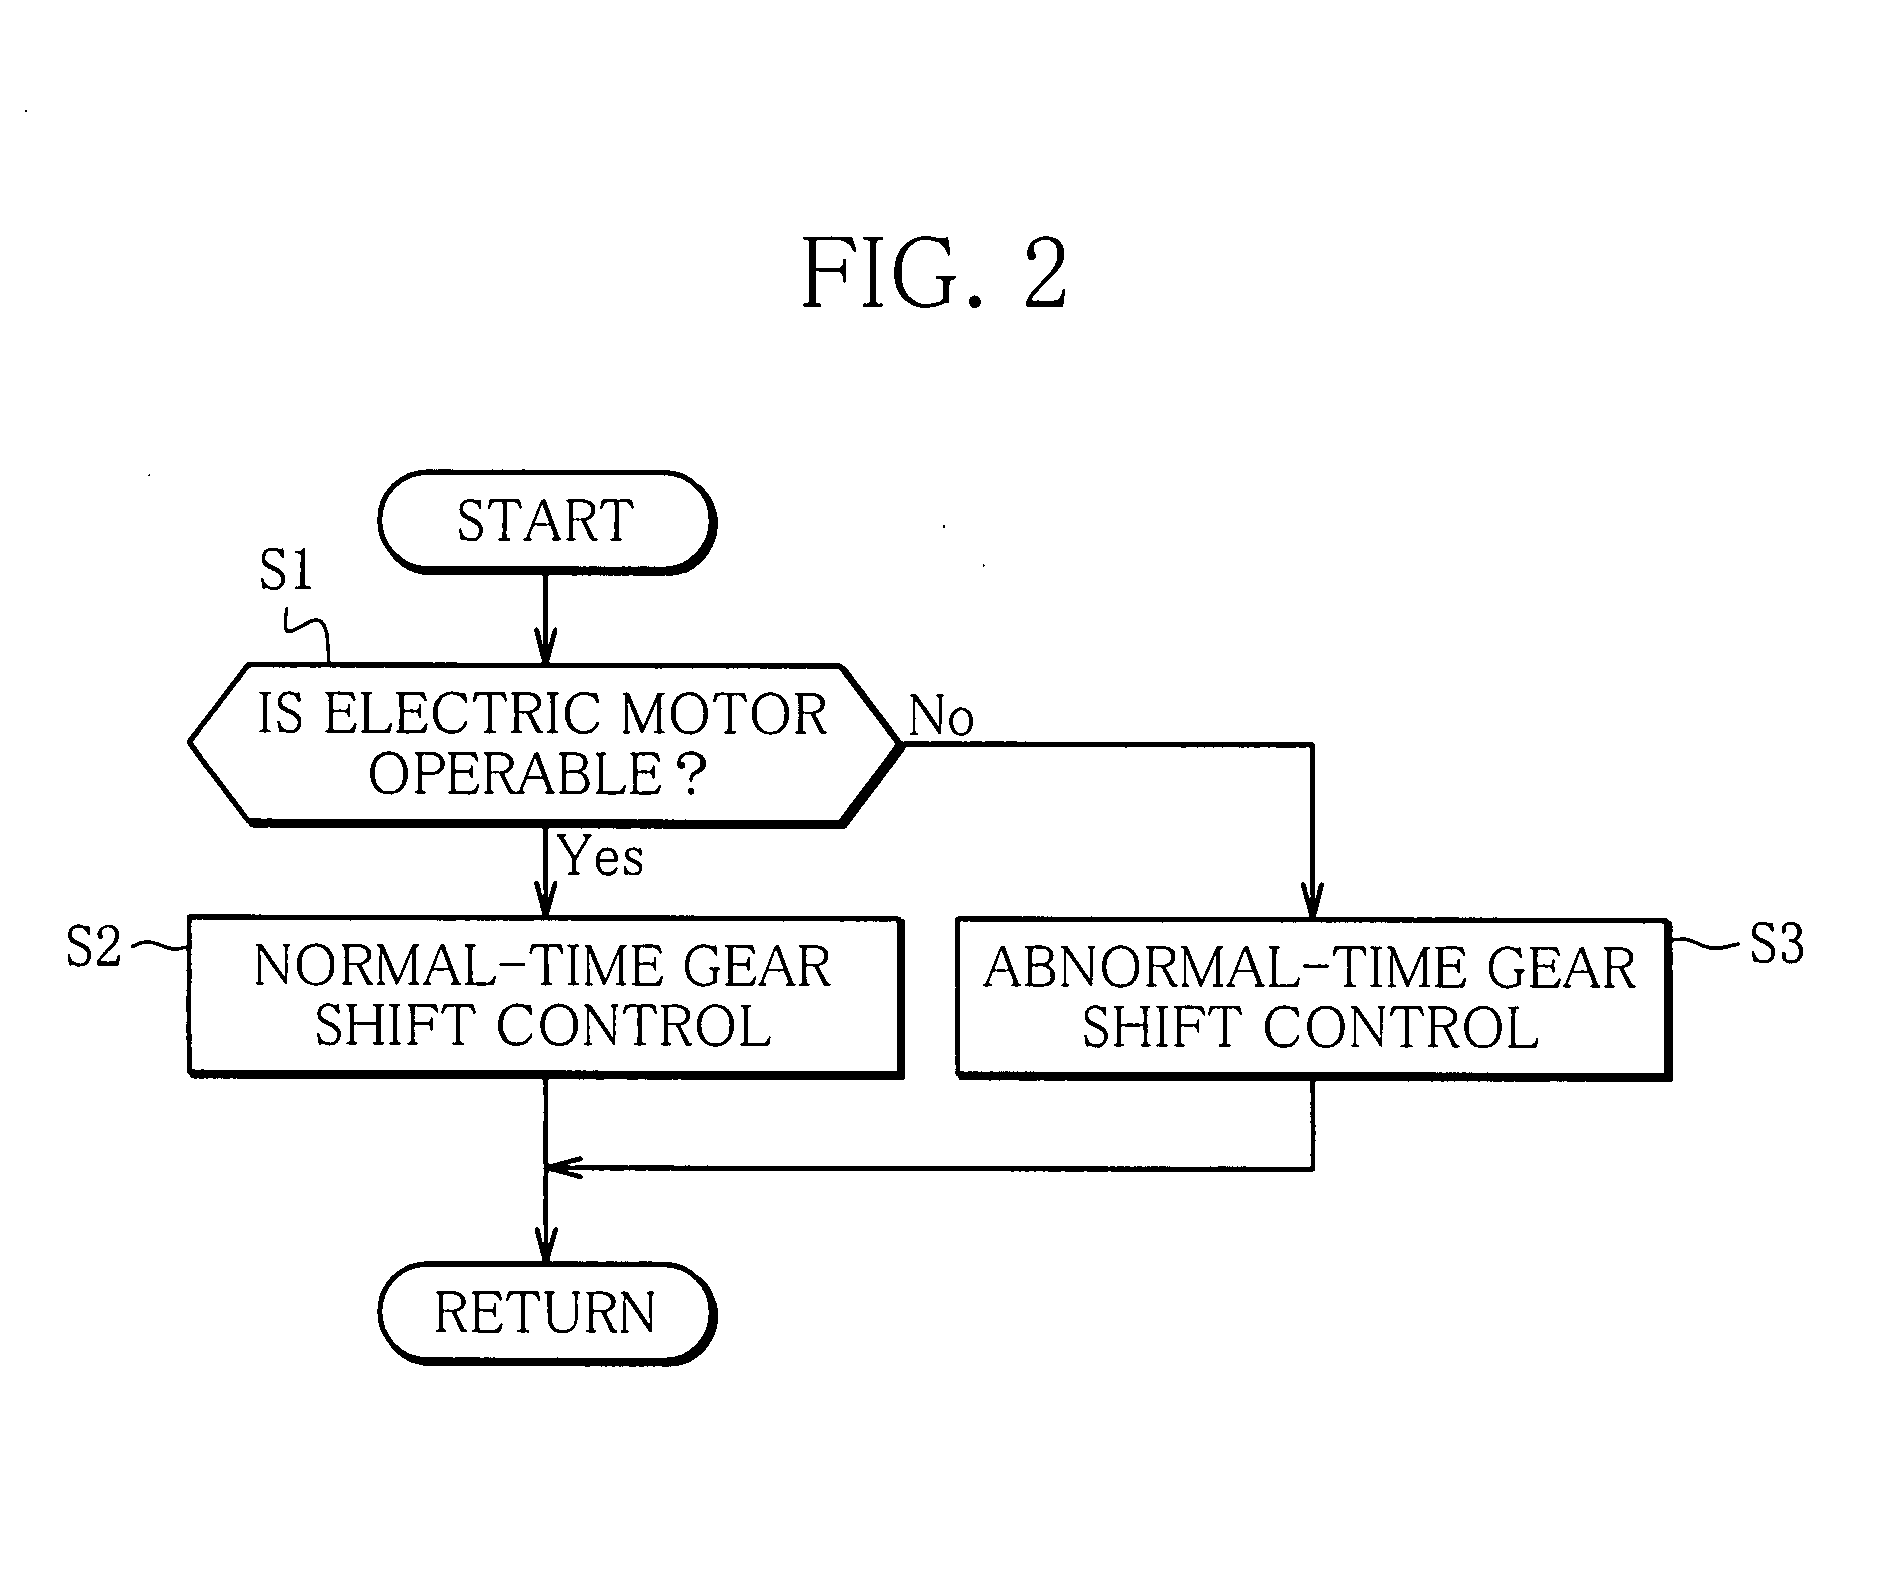 Gear shift control device for a hybrid electric vehicle